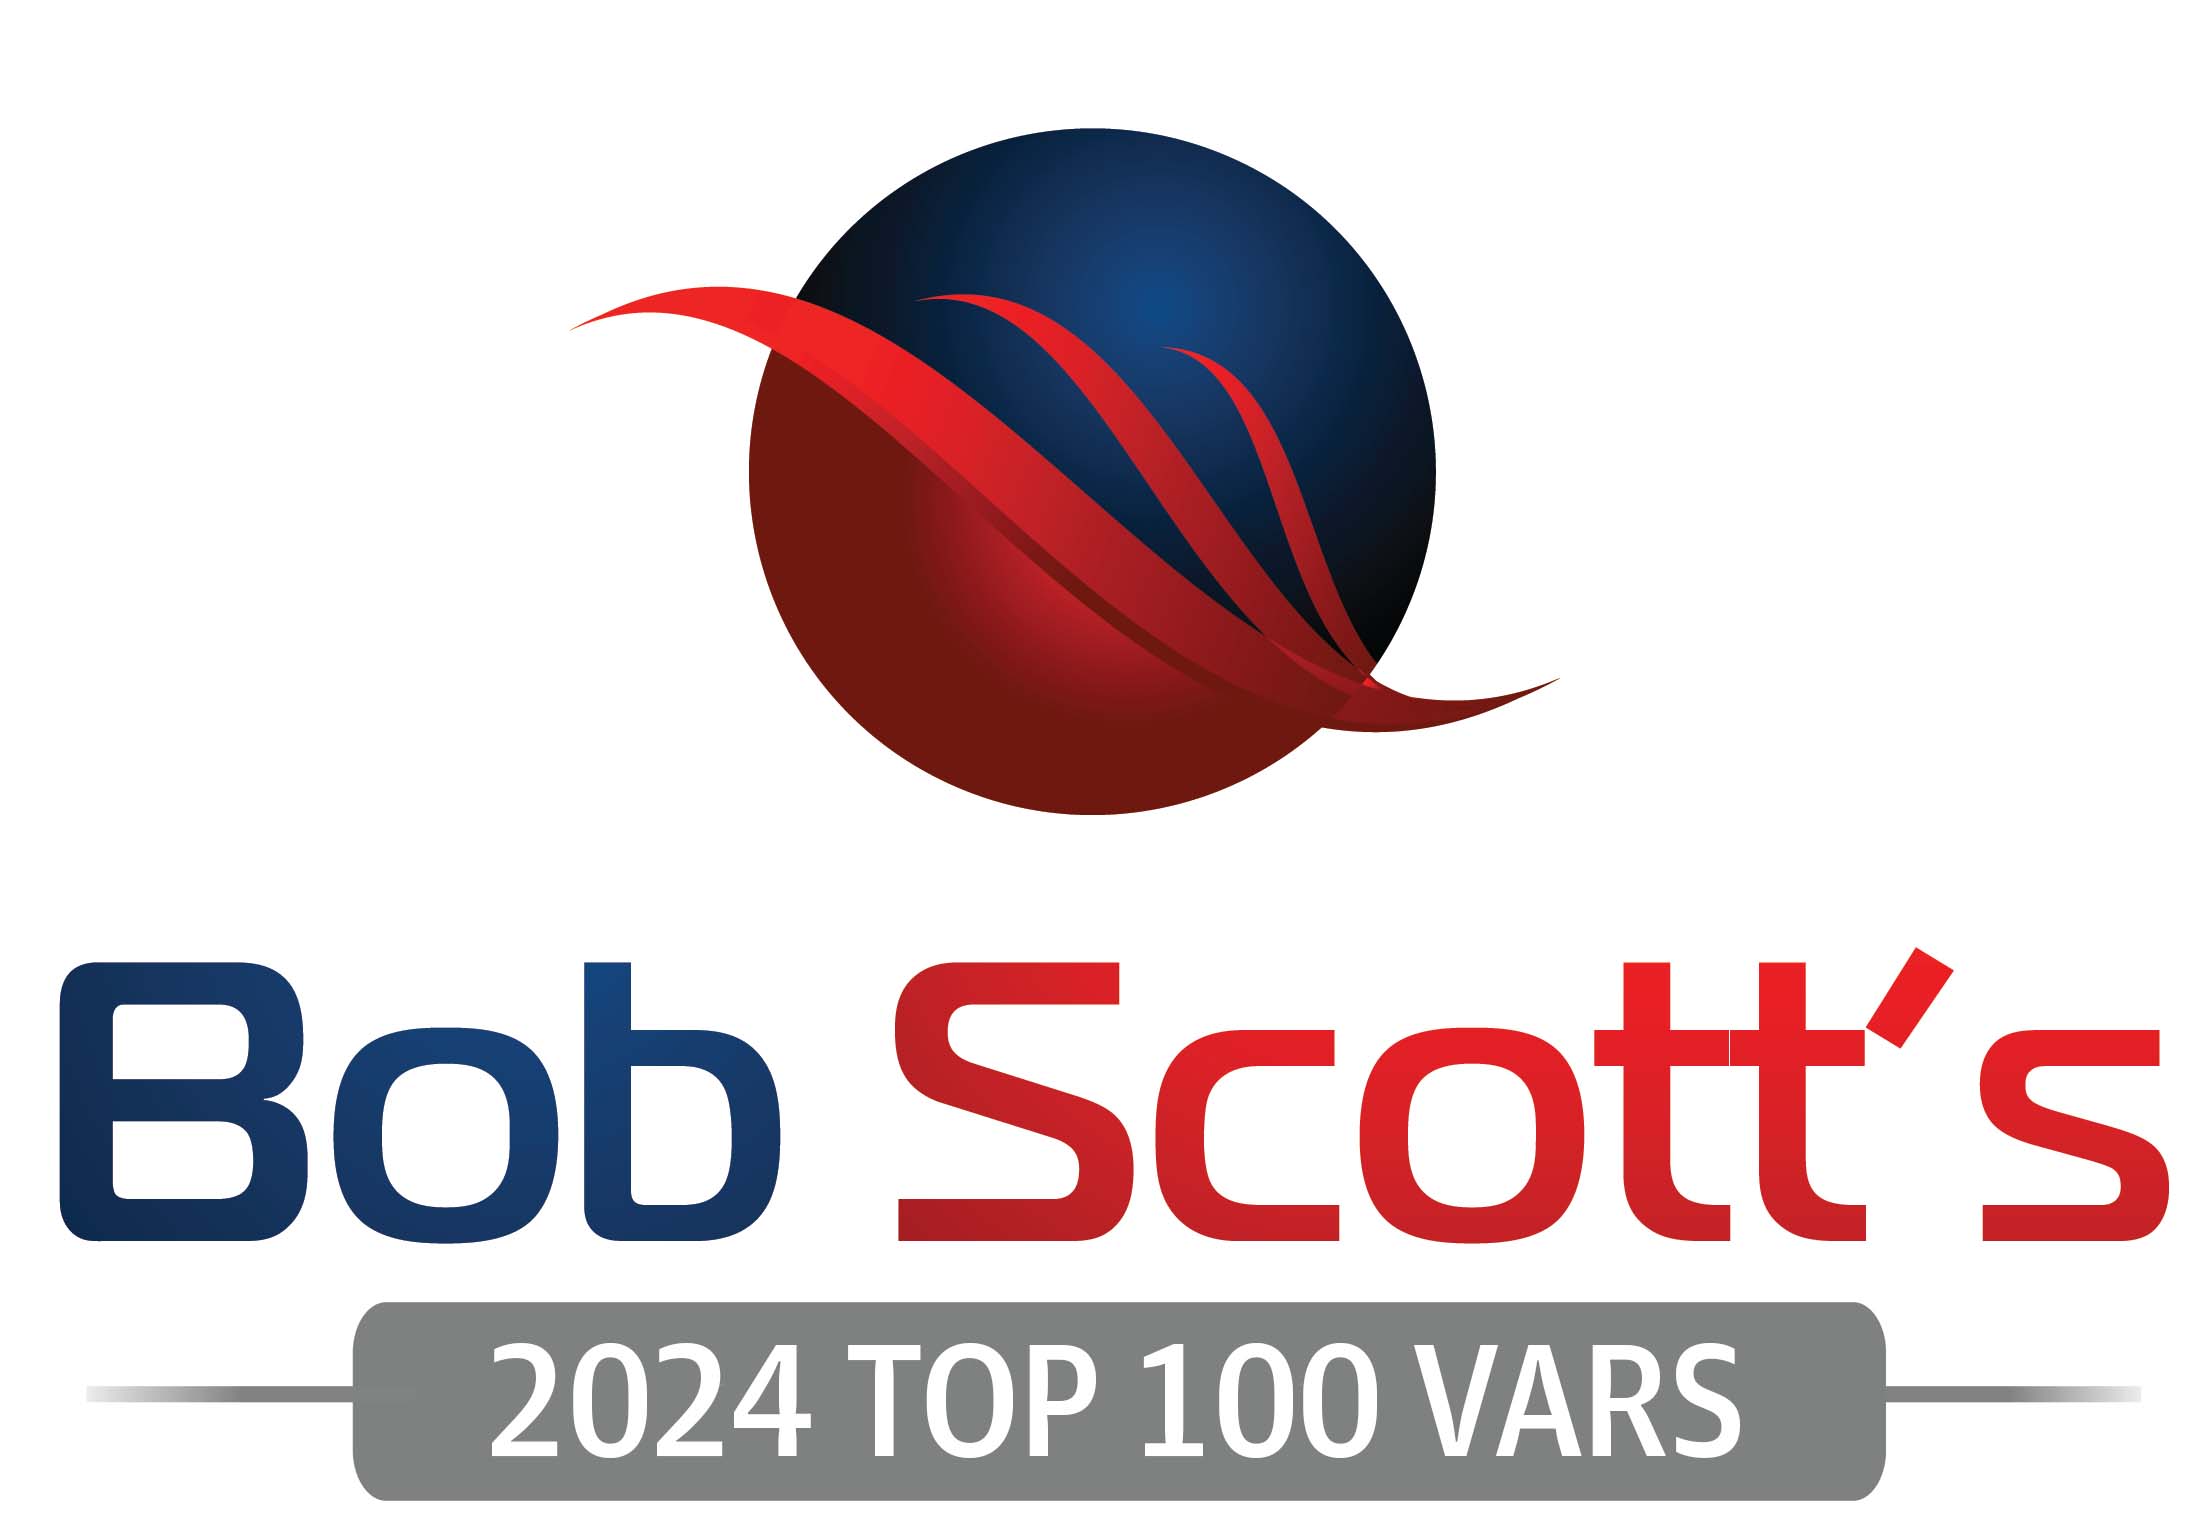 Third Wave Business Systems Makes Waves on BobScott’s Top 100 VARs 2024 List at #96